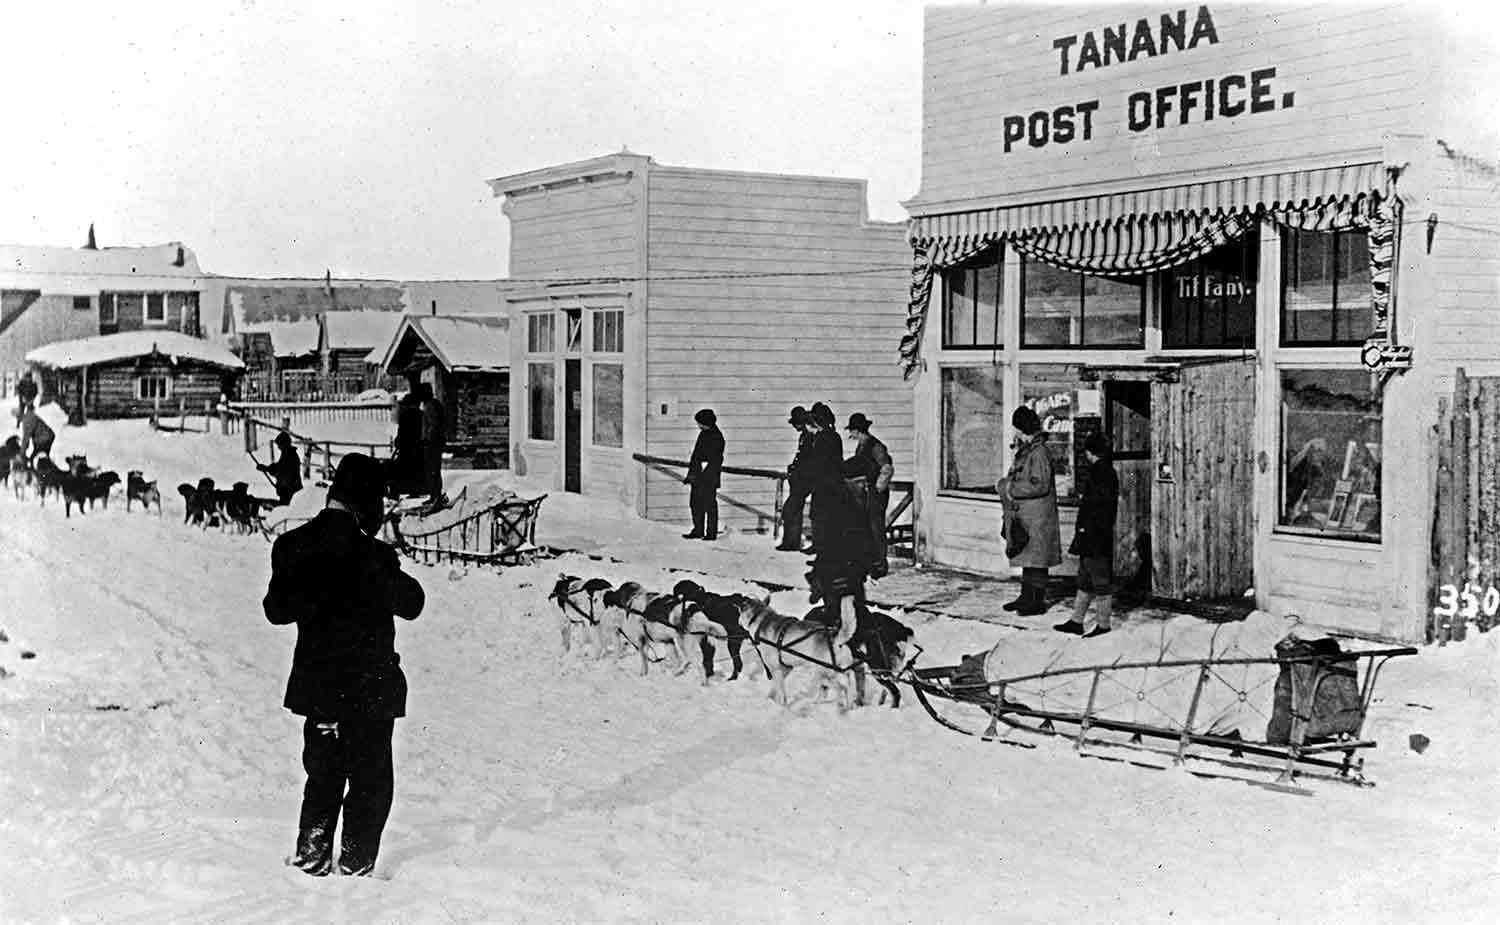 Black and white photo of two dog sleds and many dogs standing on a snowy street in front of the Tanana Post office.